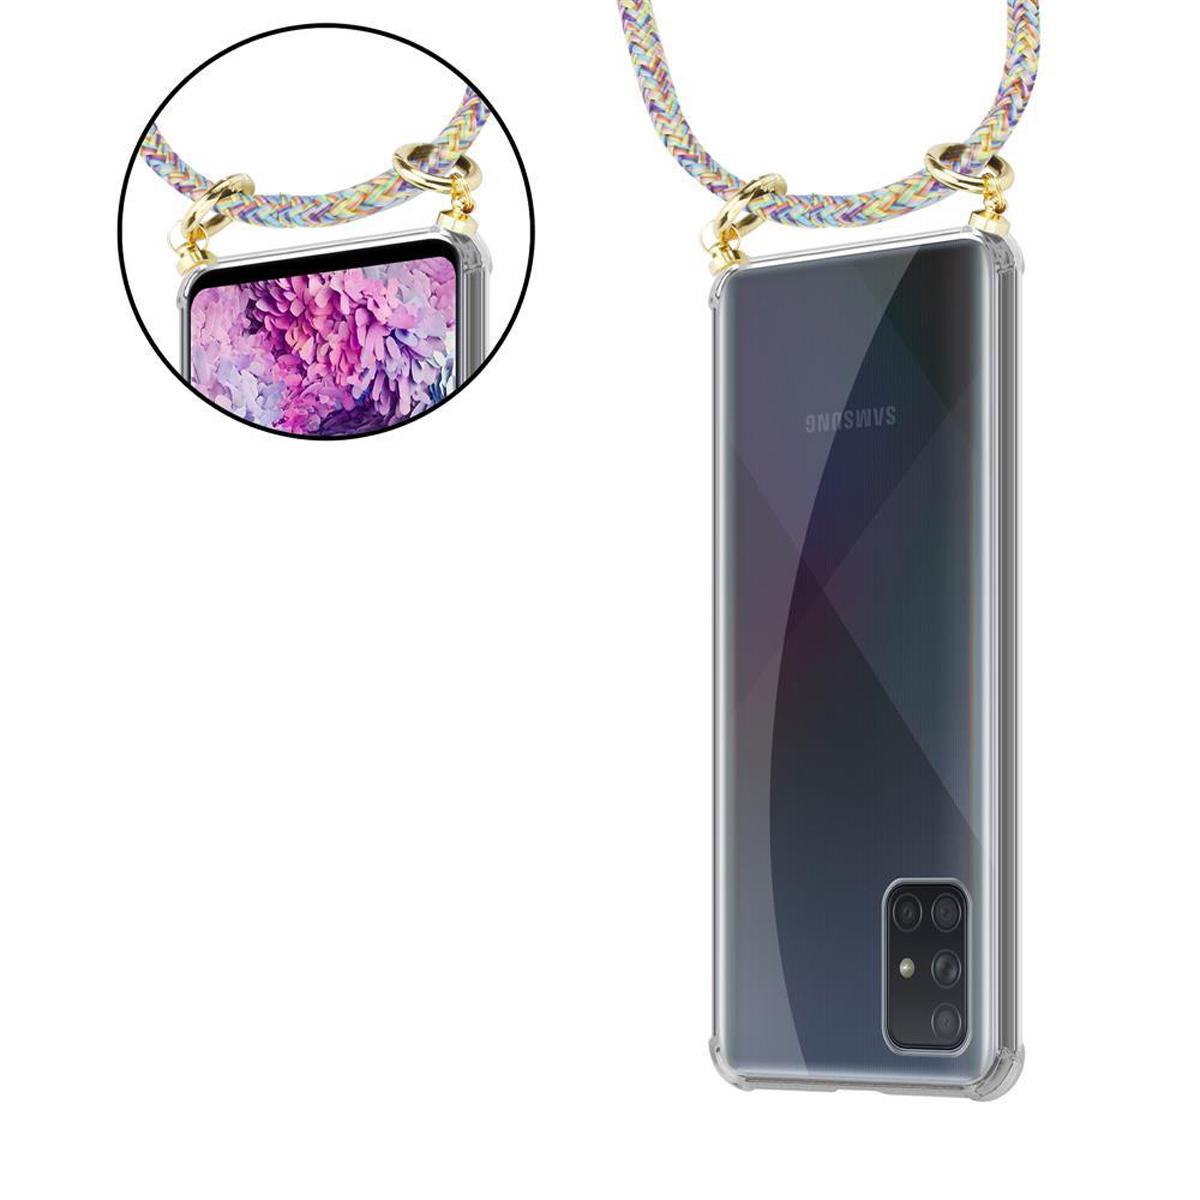 mit und Band Samsung, abnehmbarer Hülle, M40s, 4G CADORABO Galaxy Kordel / Handy Backcover, Ringen, RAINBOW A51 Gold Kette